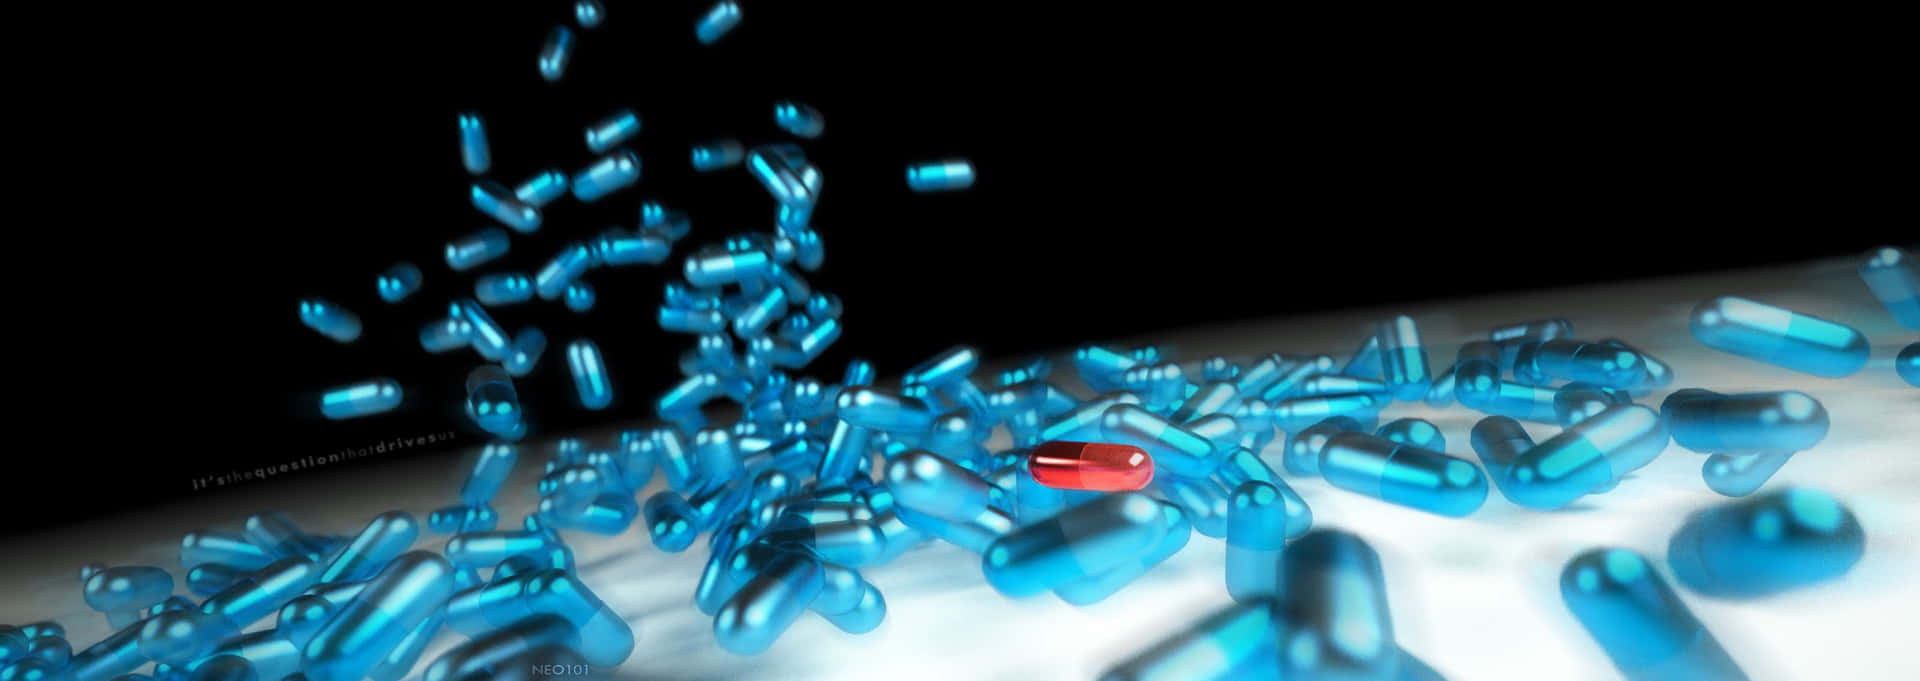 Caption: Blue and Red Medical Capsule in Descent Wallpaper